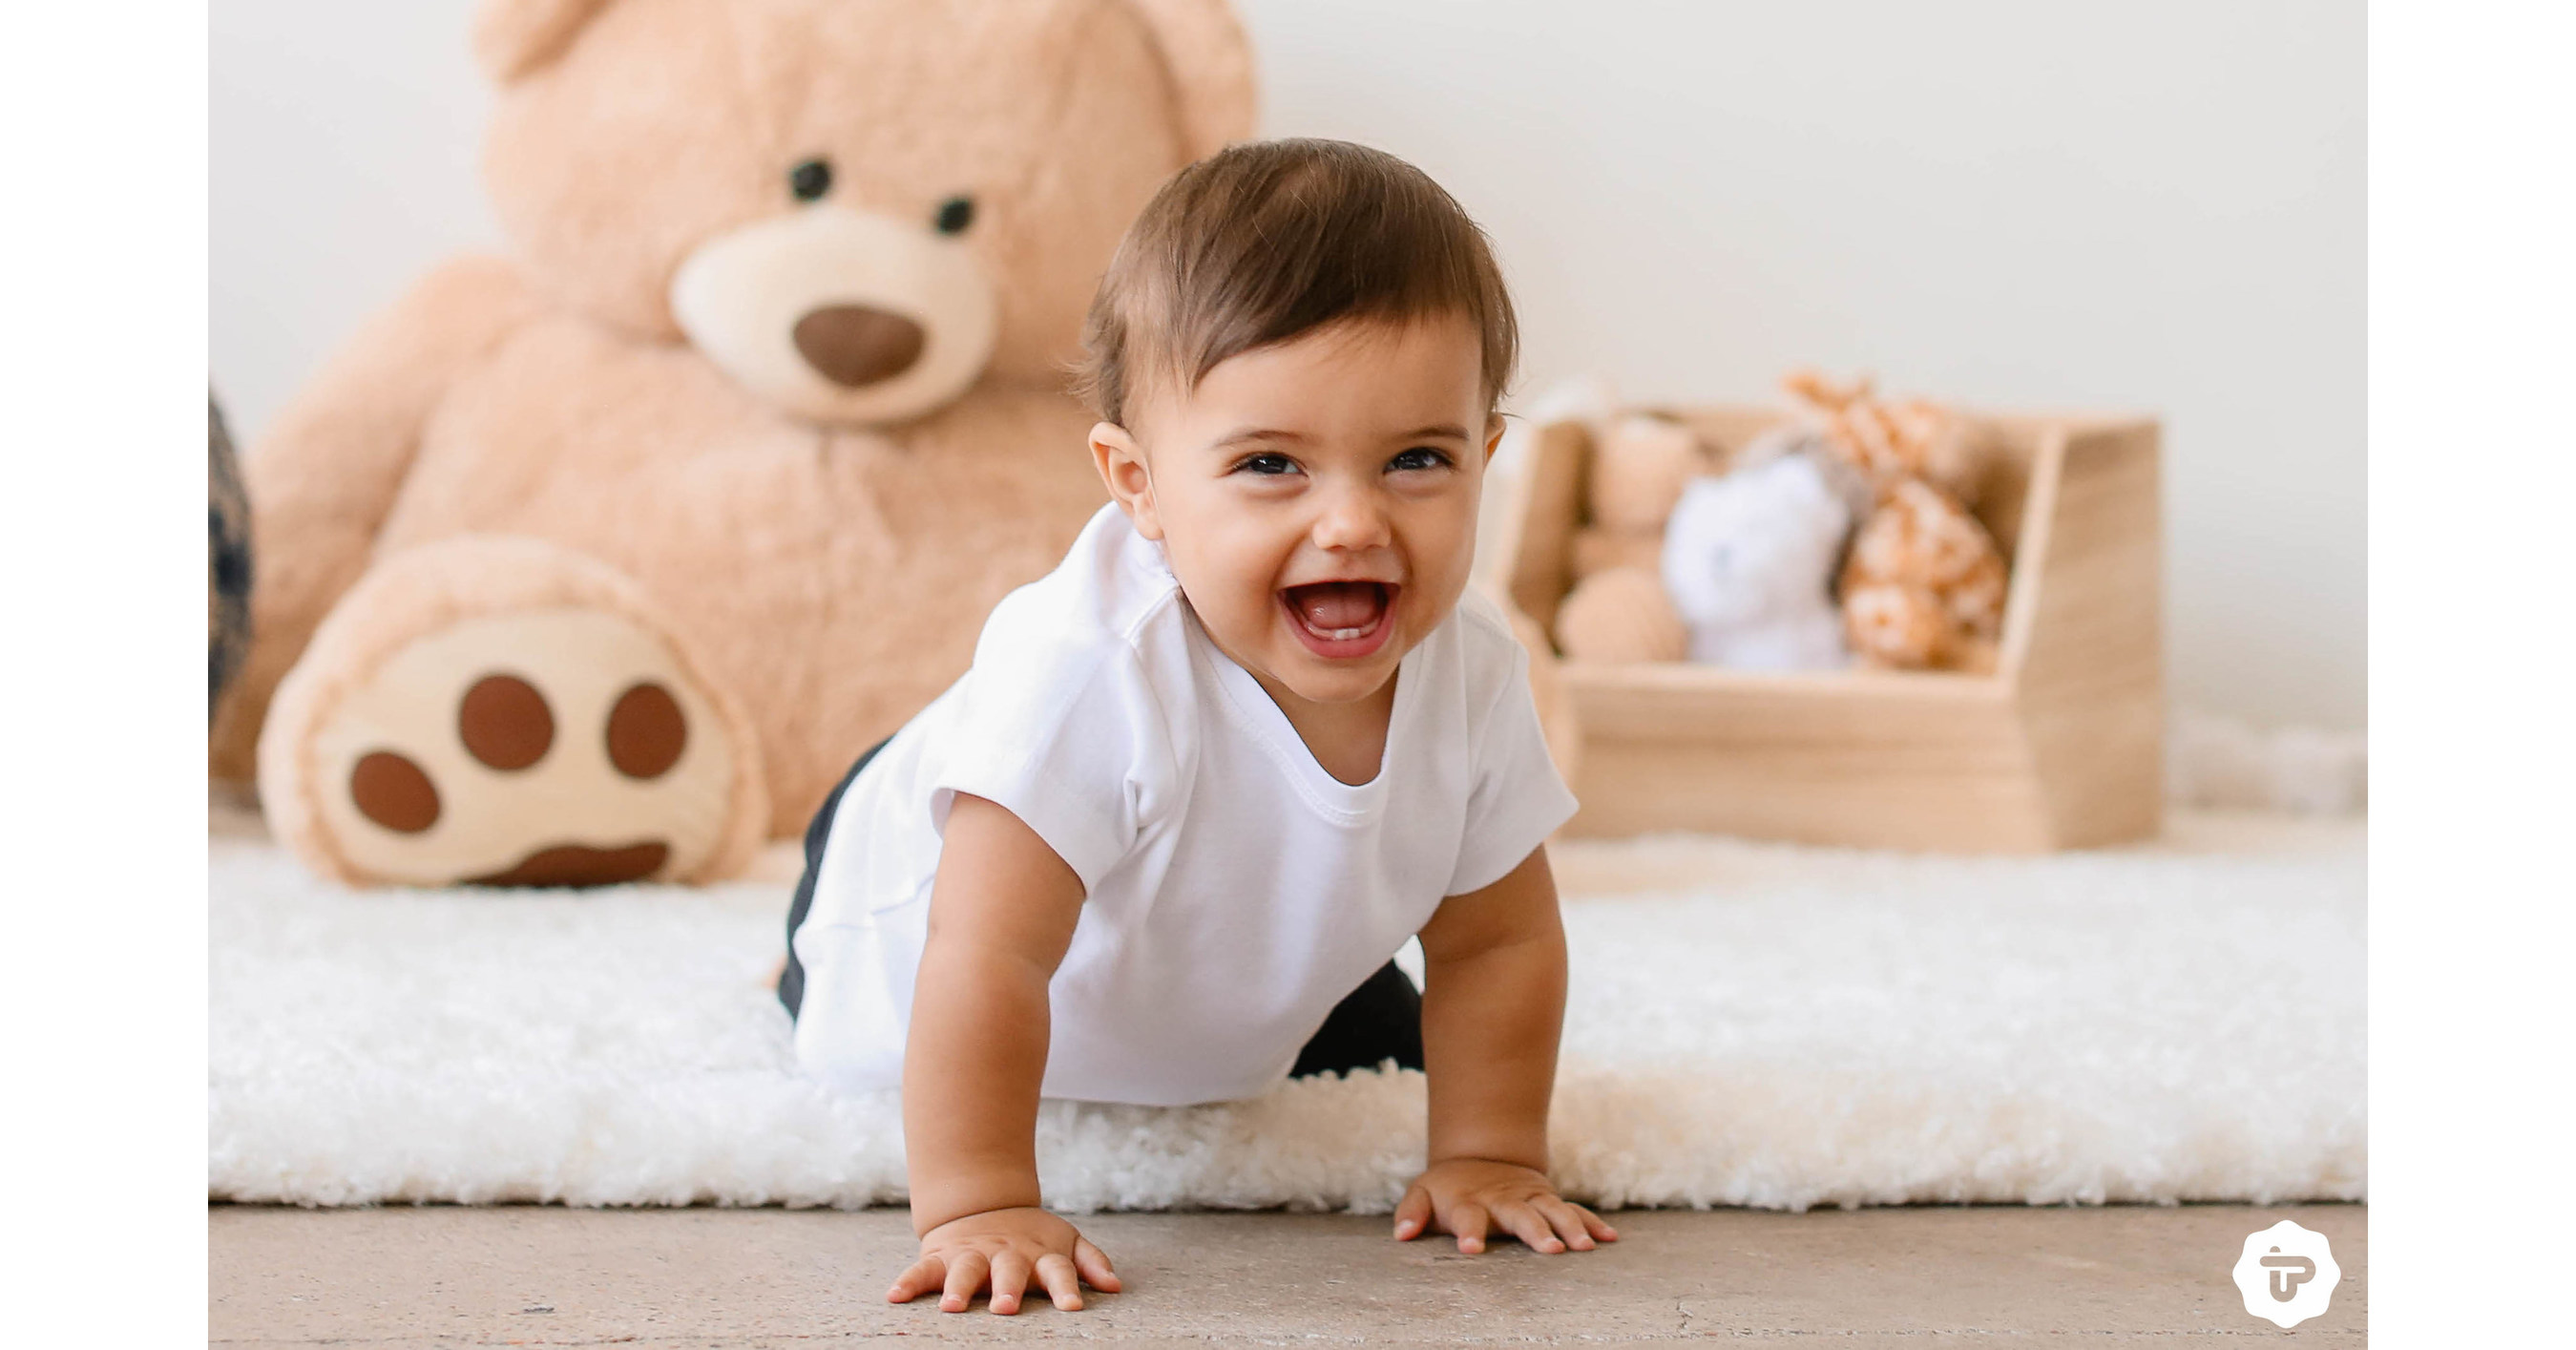 PACT Apparel Launches New, Affordable Organic Cotton Baby & Toddler Lines